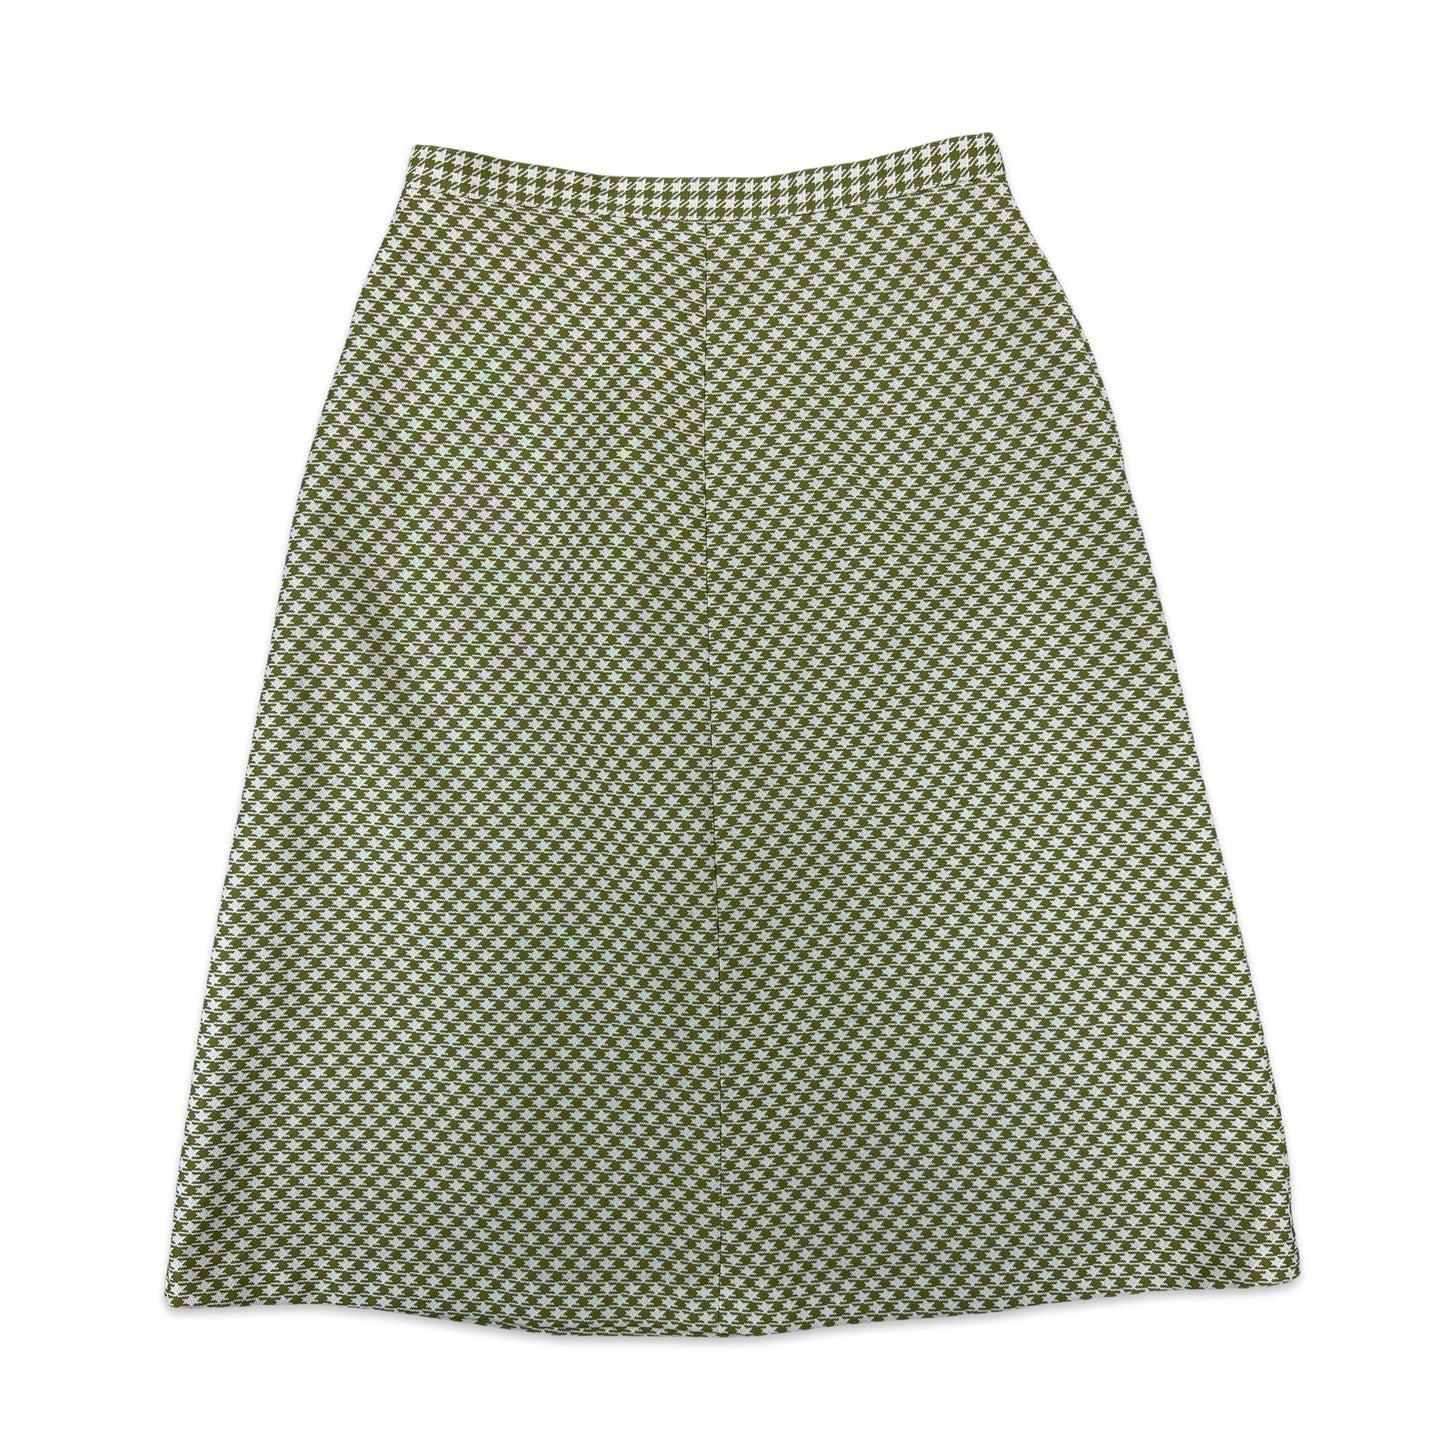 70s Vintage Green Houndstooth Check Skirt 10